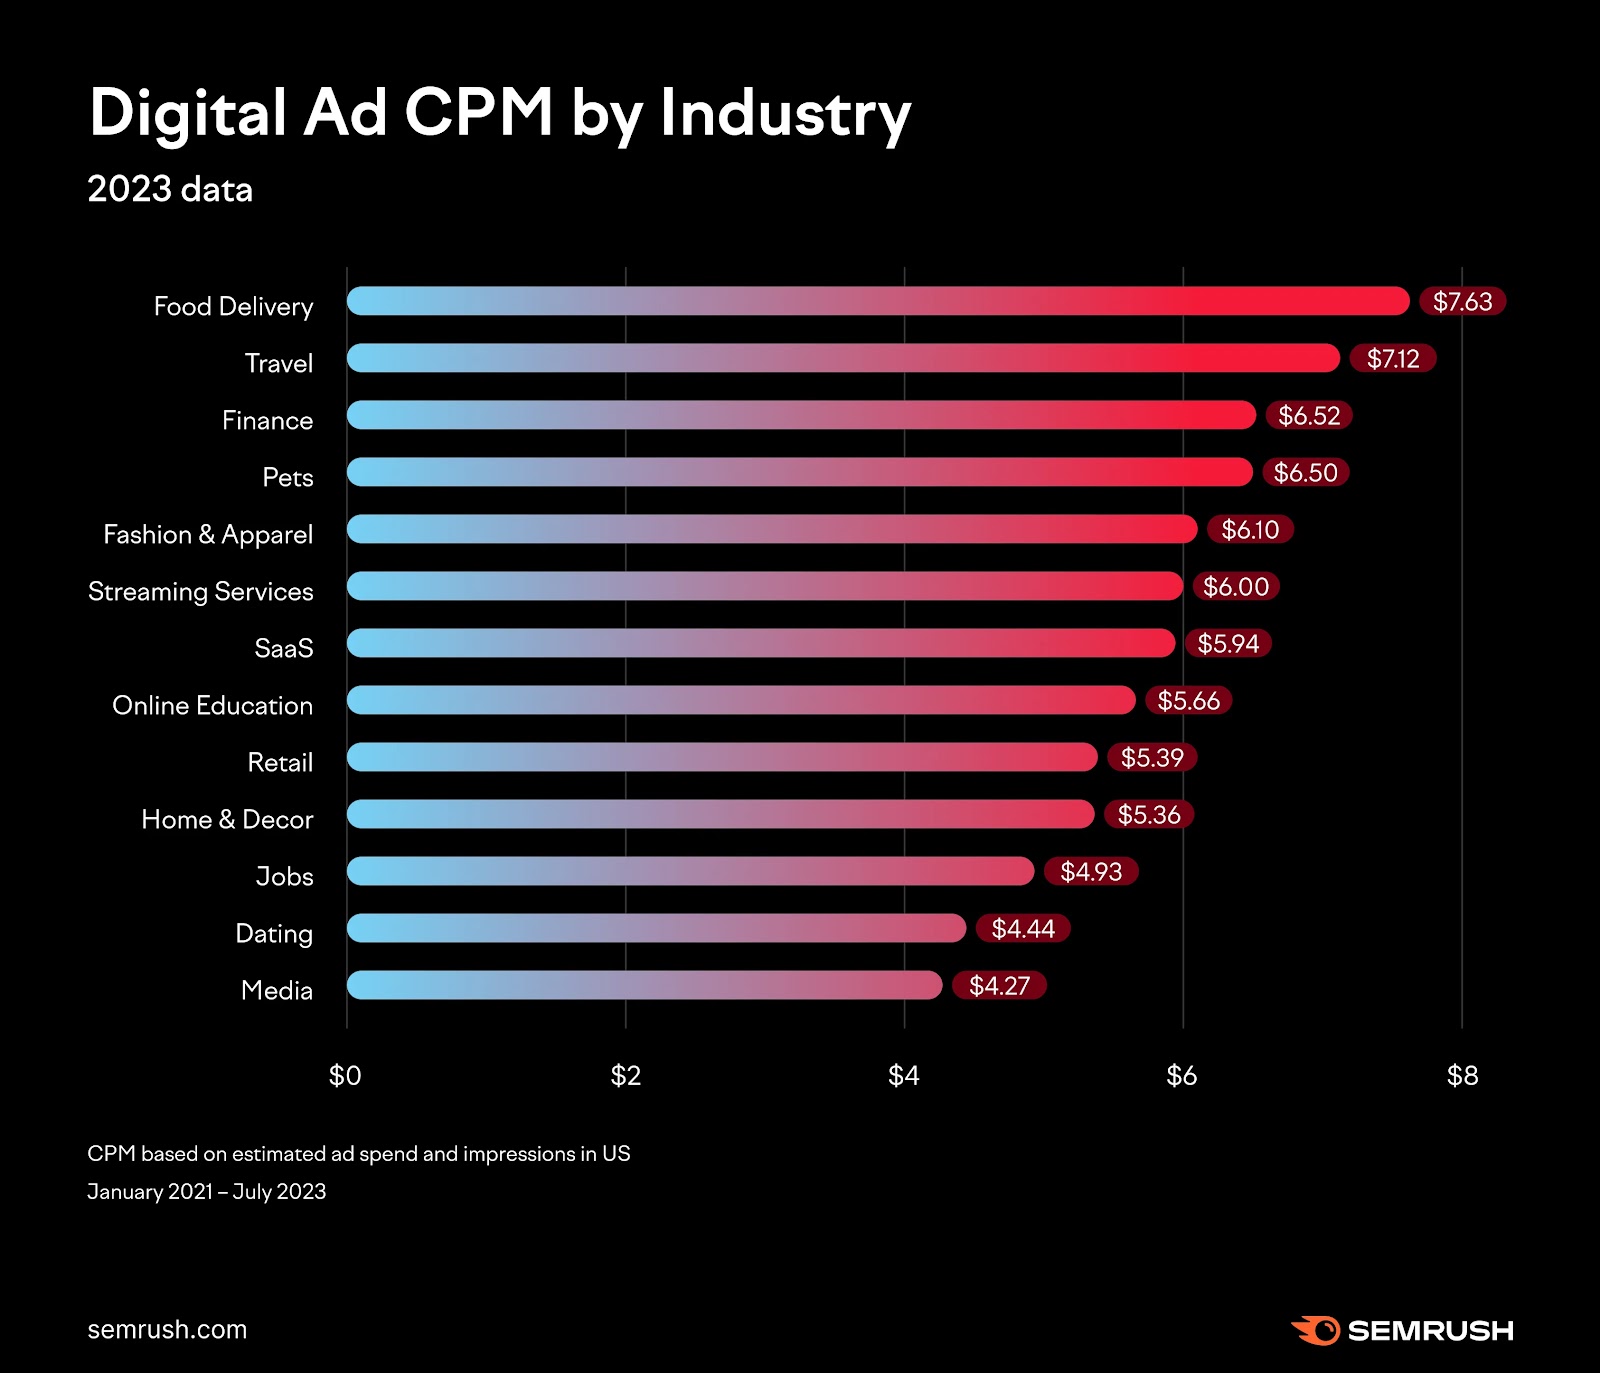 A graph showing digital ad CPM by industry from 2023 data